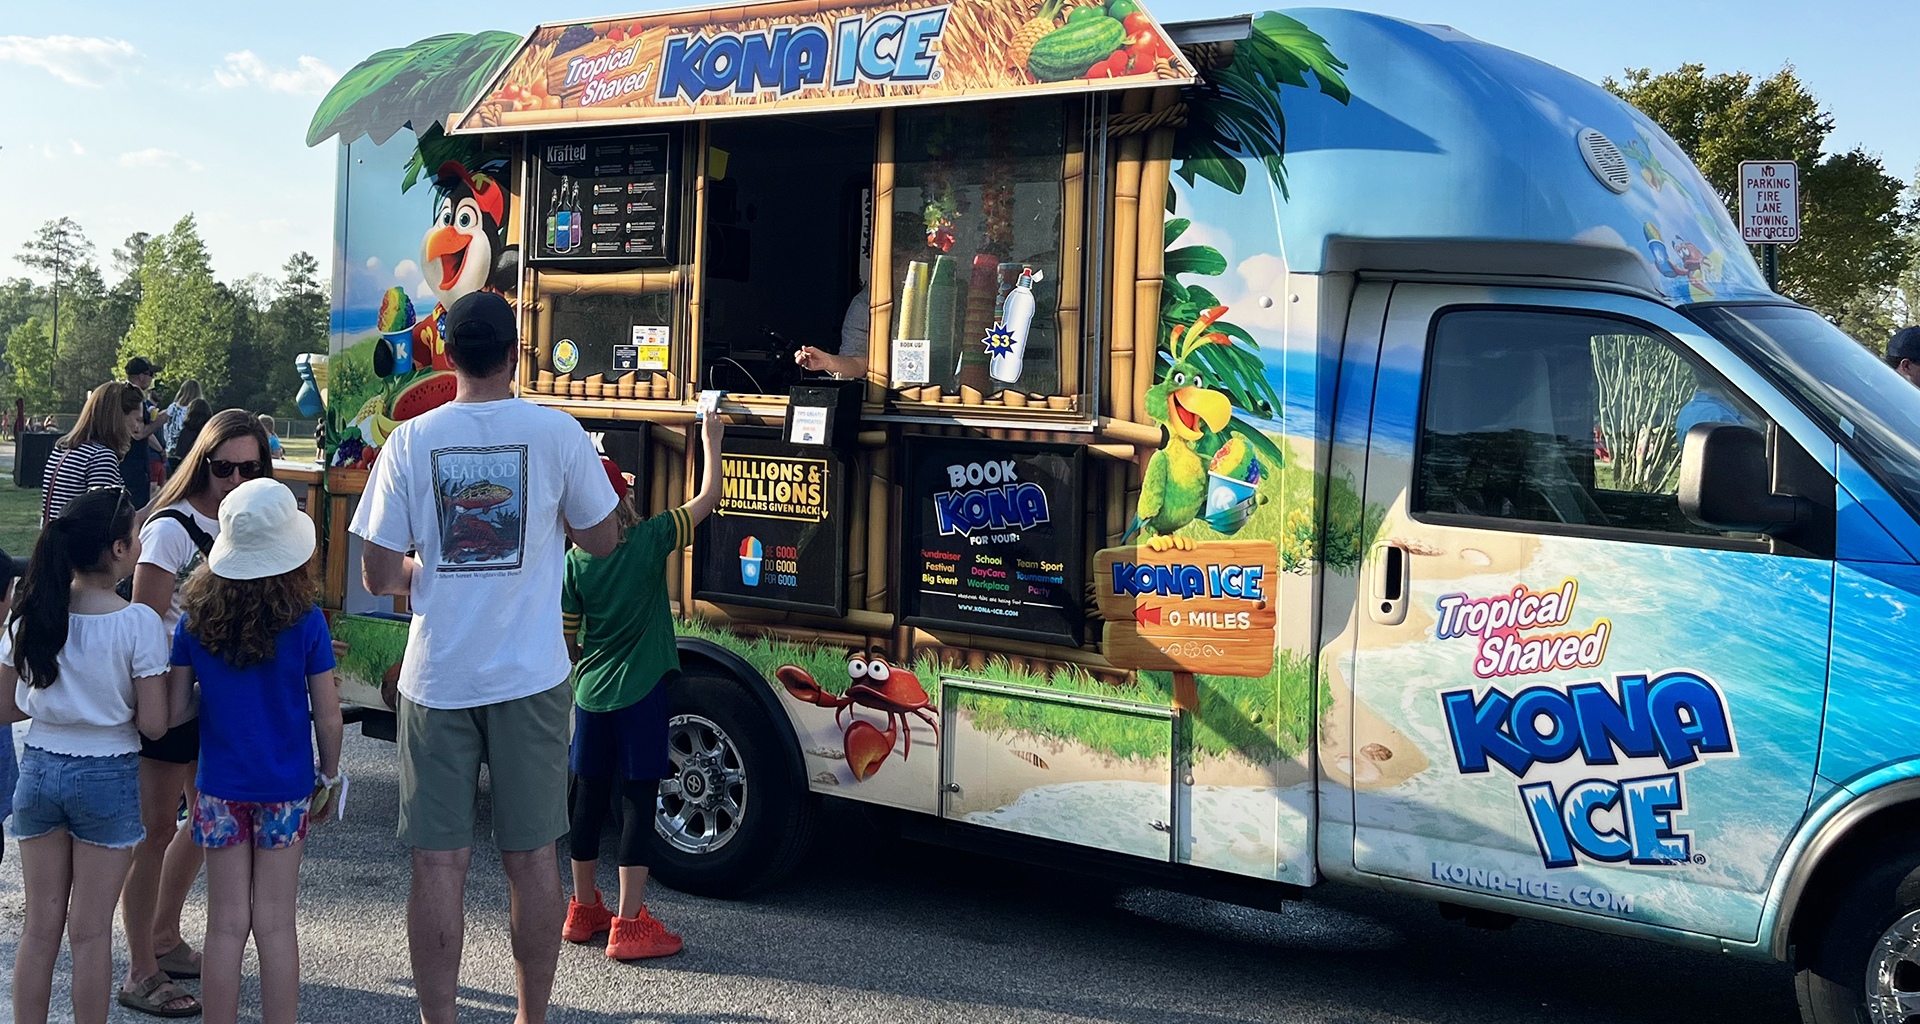 Students standing in line at the Kona Ice truck.